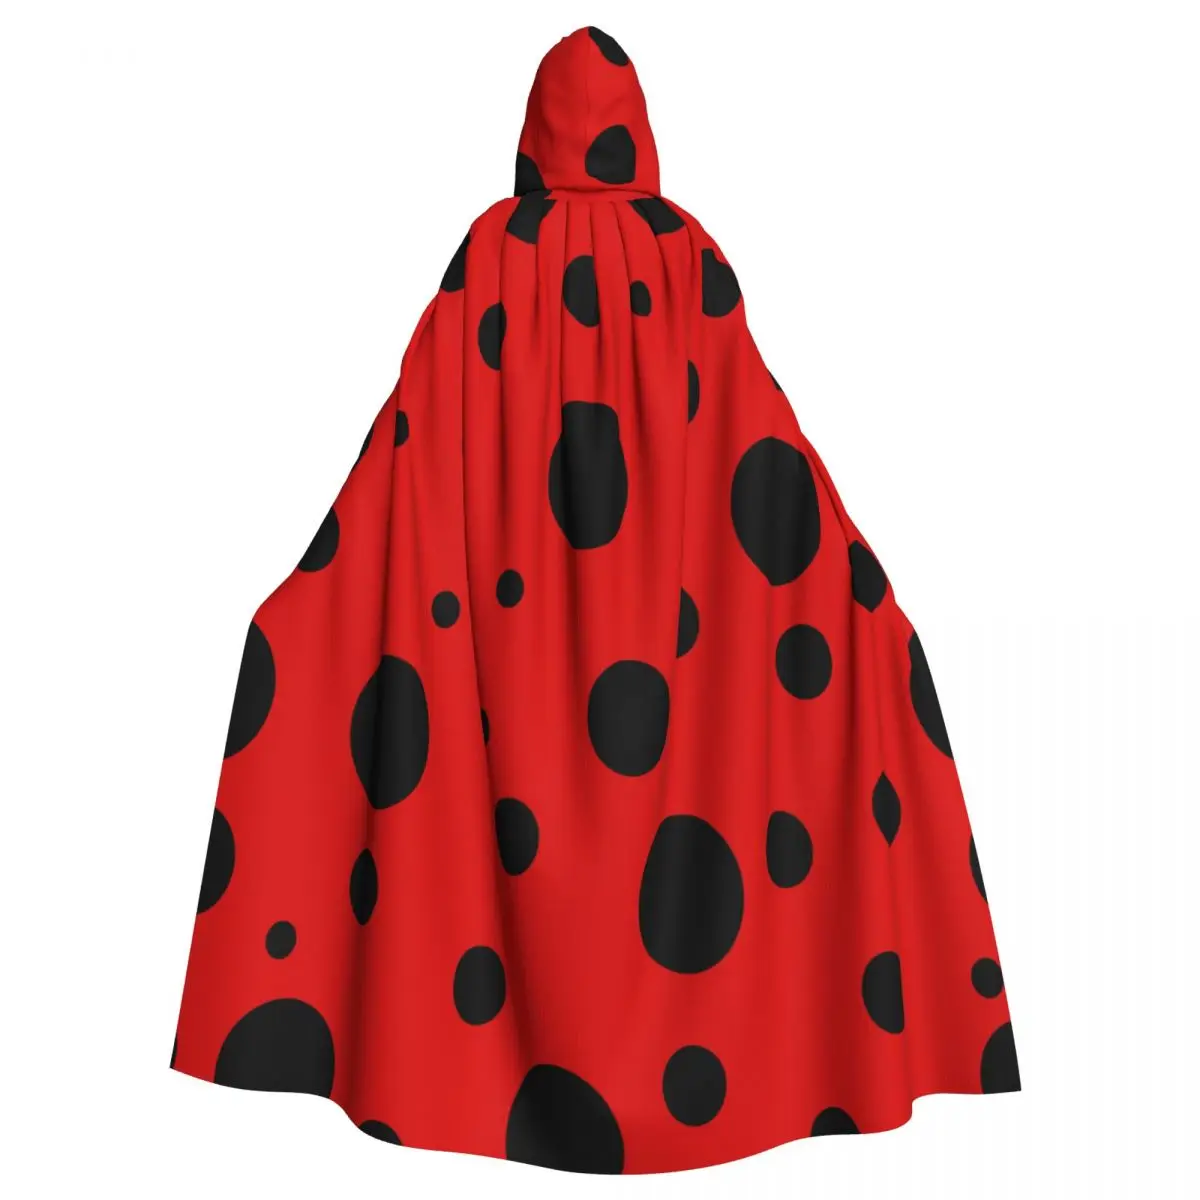 

Unisex Witch Party Reversible Hooded Adult Vampires Cape Cloak Red Ladybug Black Spots